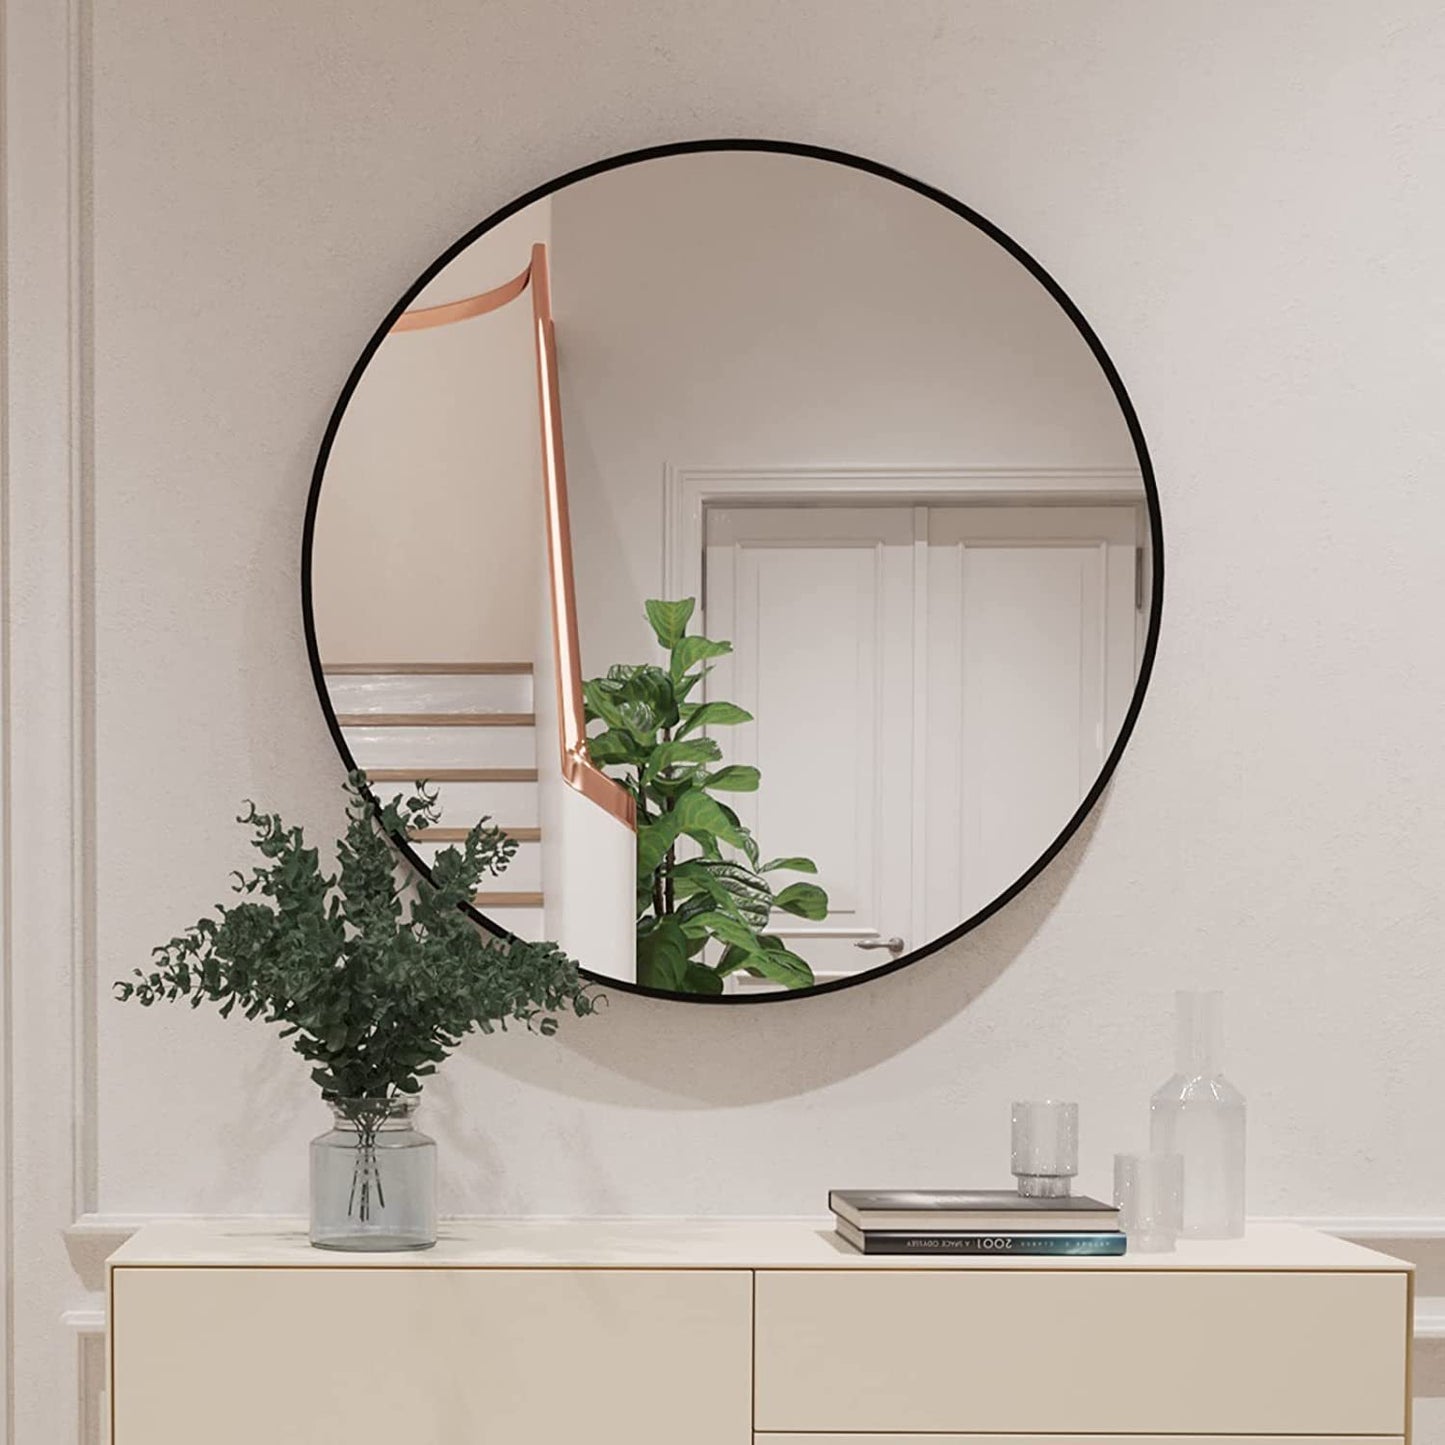 Round Mirror, Circle Mirror 32 Inch, Black Round Wall Mirror Suitable for Bedroom, Living Room, Bathroom, Entryway Wall Decor and More, Brushed Aluminum Frame Large Circle Mirrors for Wall